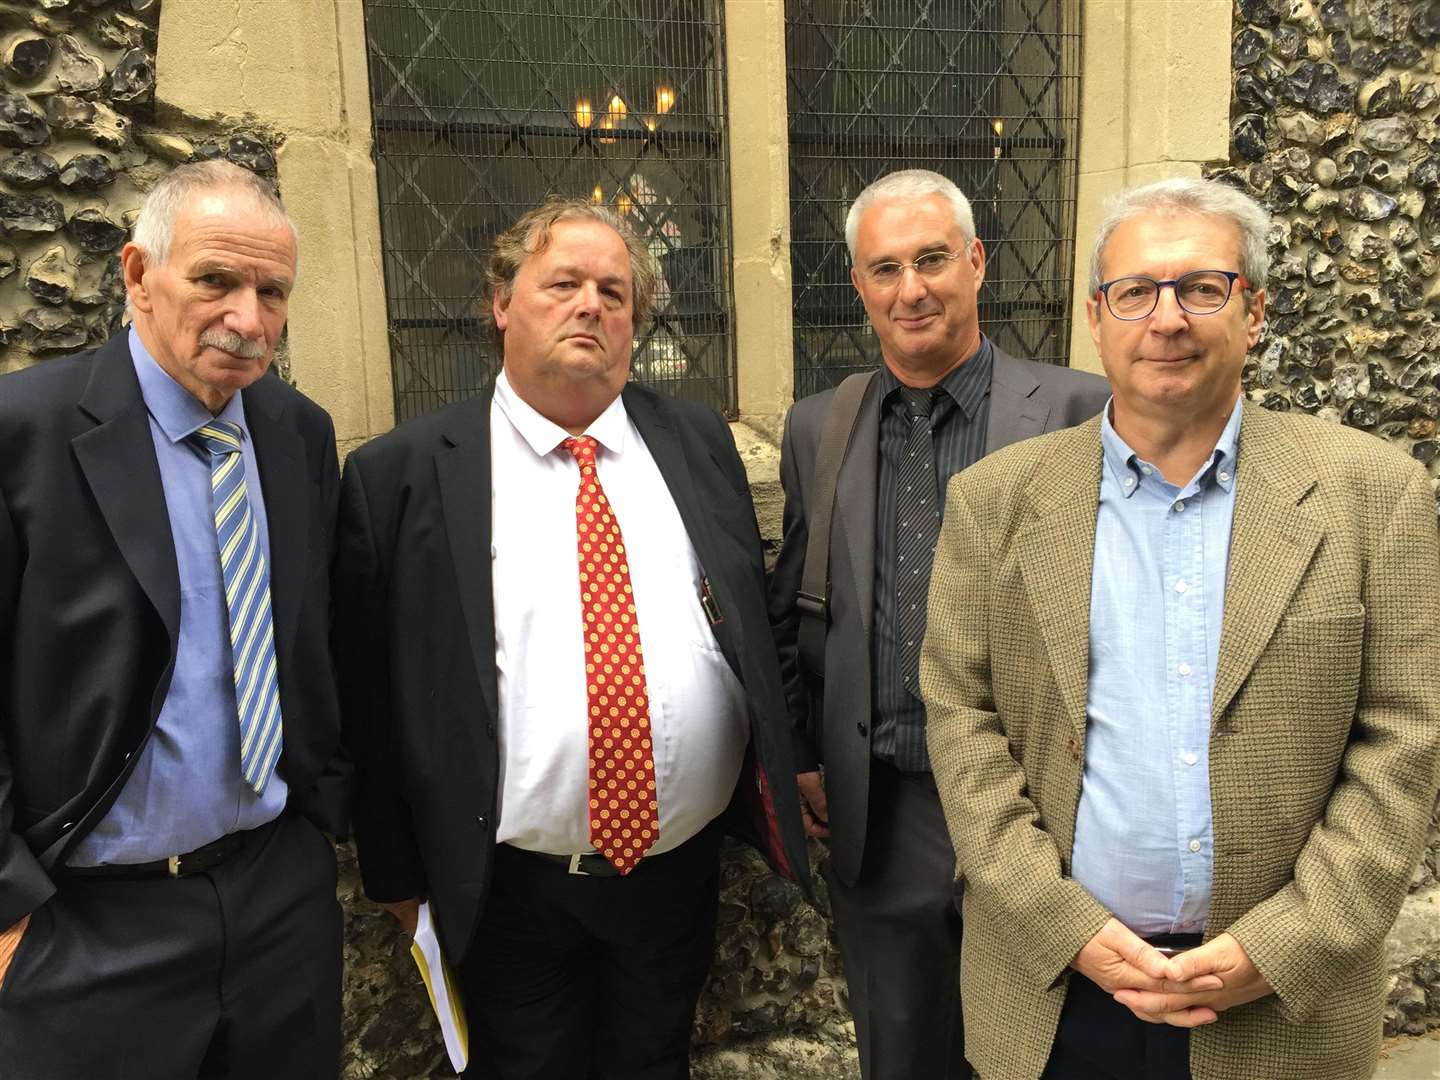 From left to right, residents Dr Robert Jackson, Mark Boardman, Steven Barrow and Gerard Jakamavicius at the planning inquiry